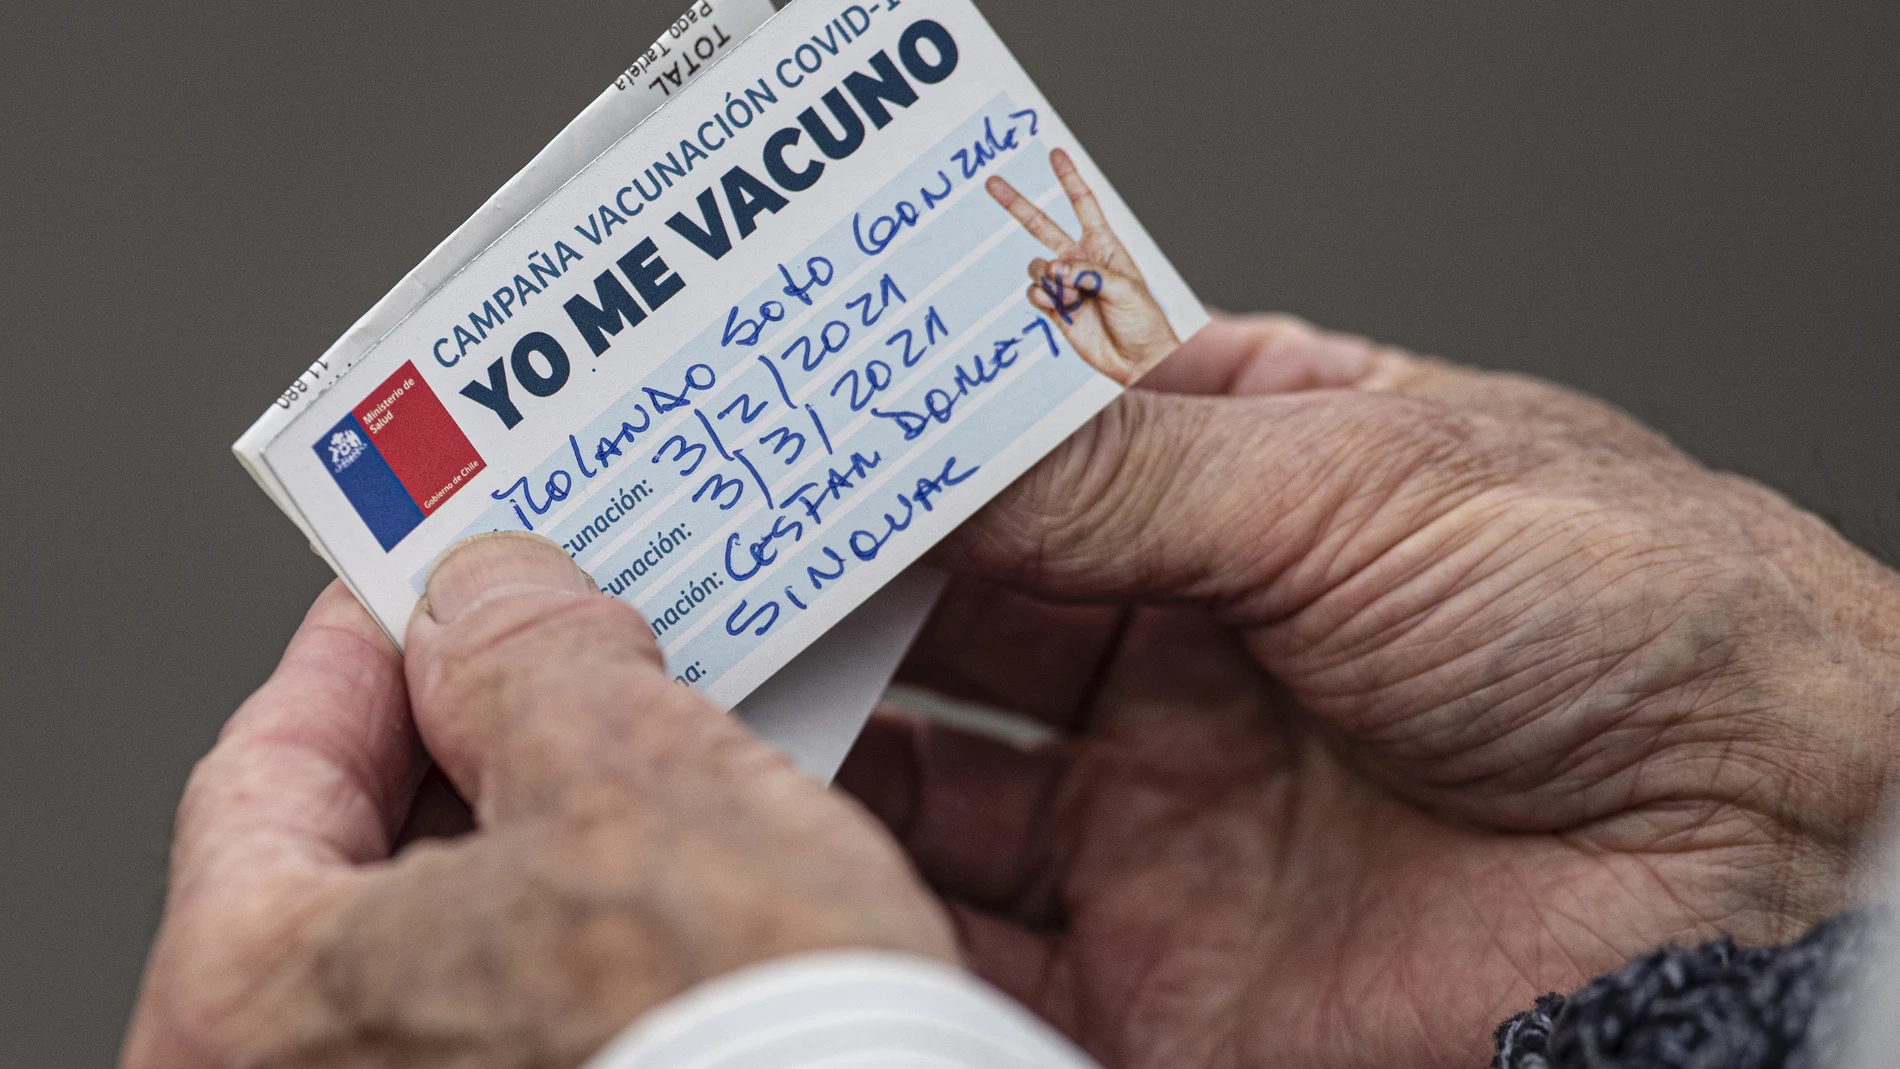 FILE - In this Wednesday, Feb. 3, 2021, file photo, an elderly man looks at his vaccination card after getting a shot of the CoronaVac vaccine for COVID-19 developed by China's biopharmaceutical company Sinovac Biotech, at a clinic in Santiago, Chile. It wasnâ€™t until Sinovac swooped in with 4 million doses in late January that Chile began inoculating its population of 19 million with impressive speed. (AP Photo/Esteban Felix, File)